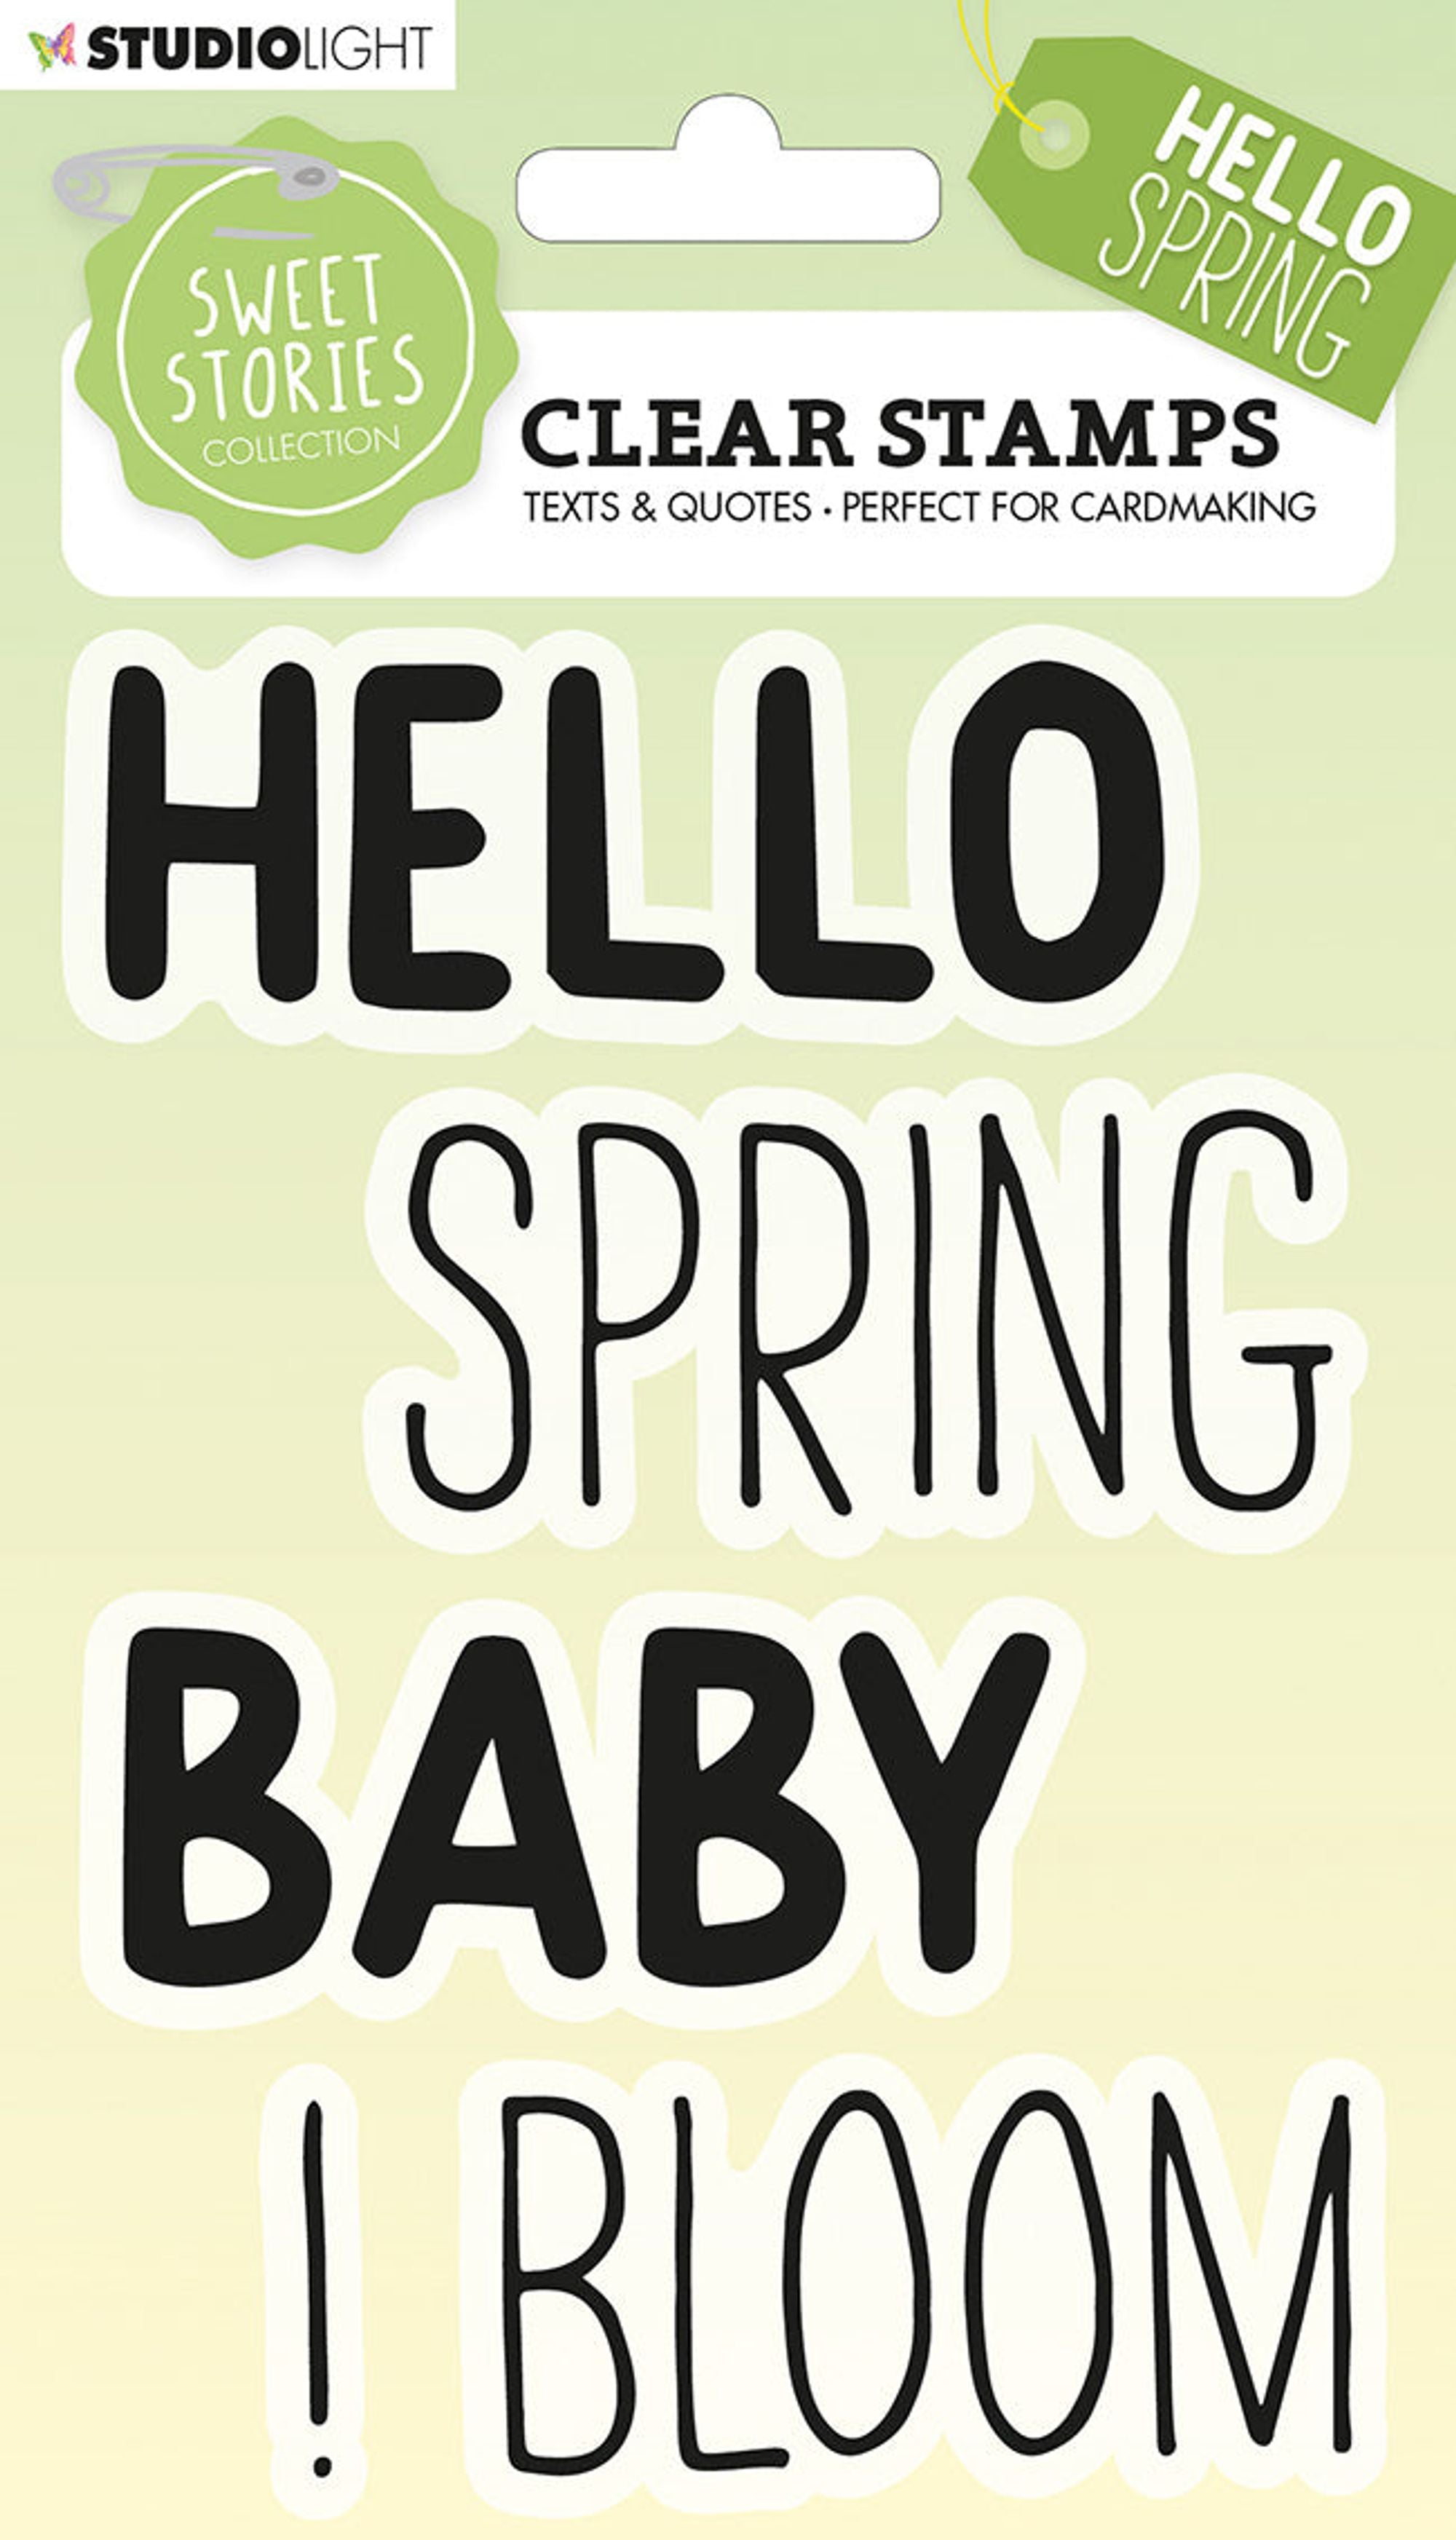 SS Clear Stamp Quotes Large Hello Spring Sweet Stories 105x148x3mm 4 PC nr.214